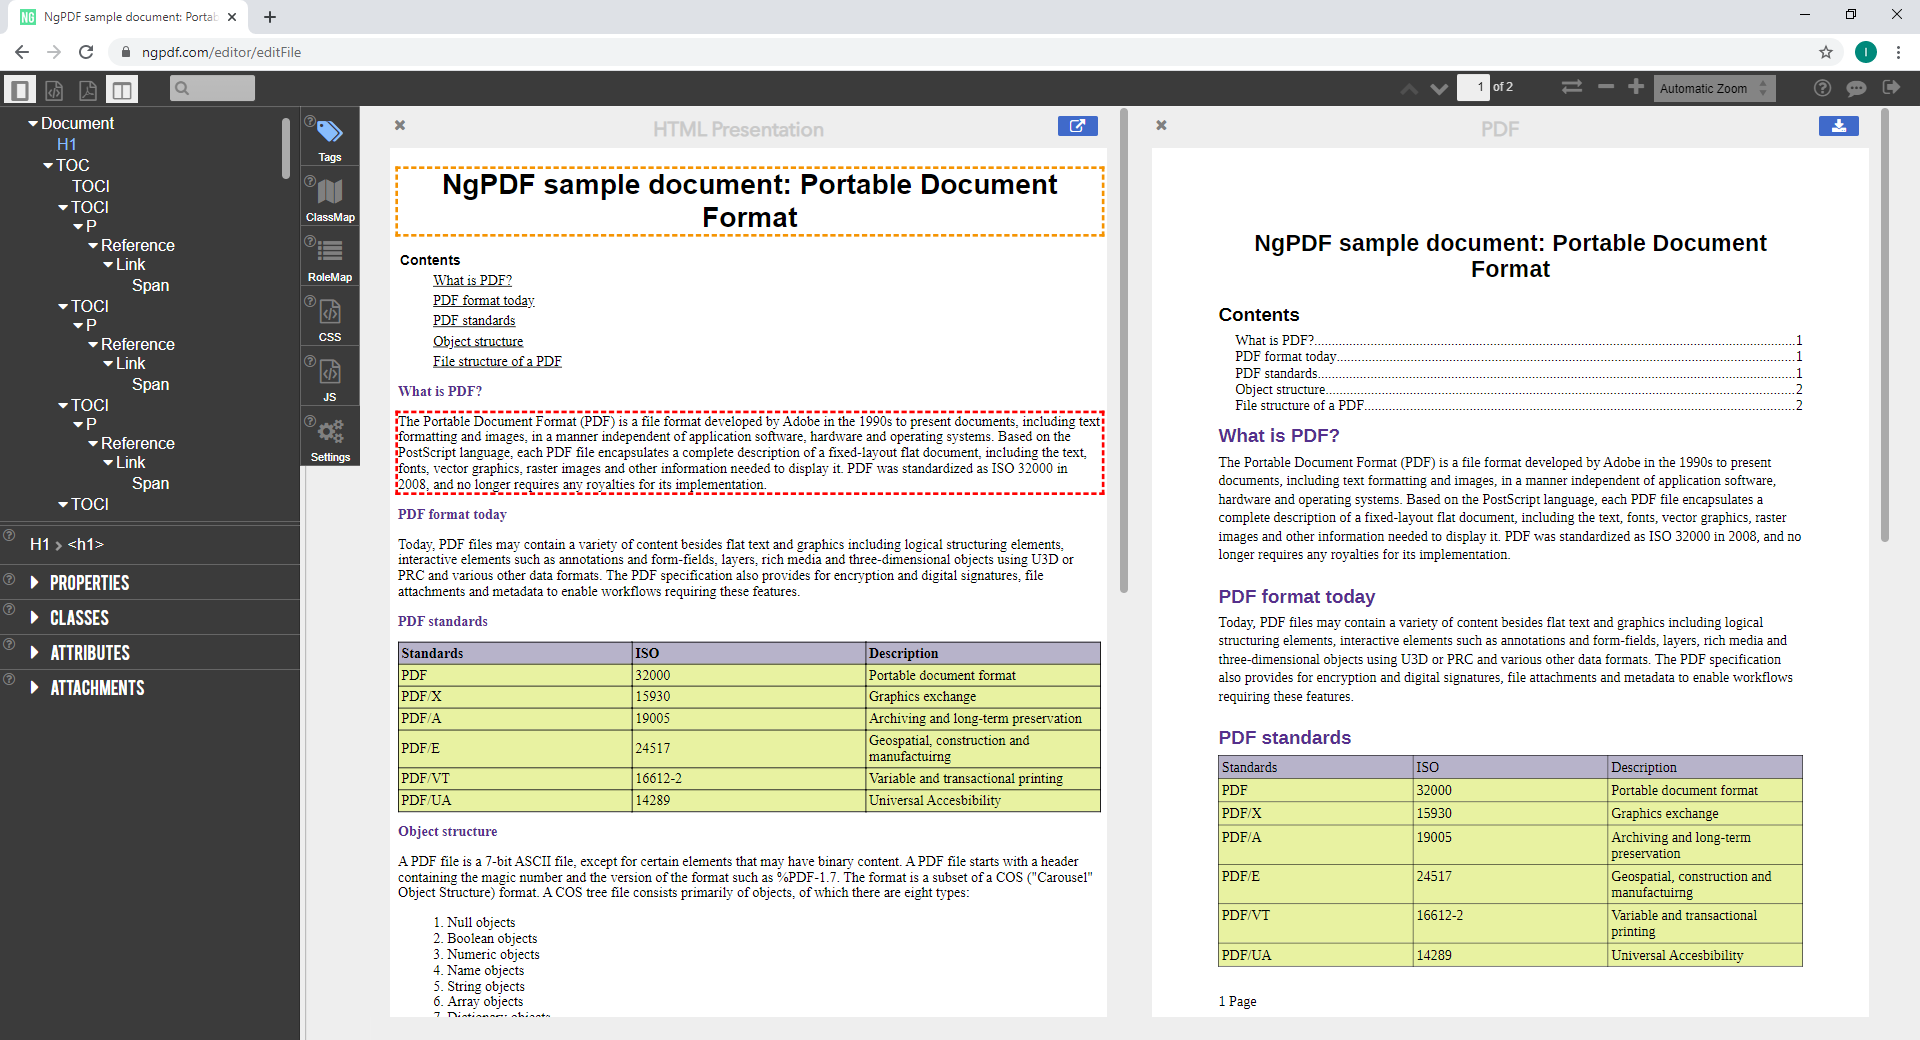 The HTML representation of the example PDF document in the ngPDF application